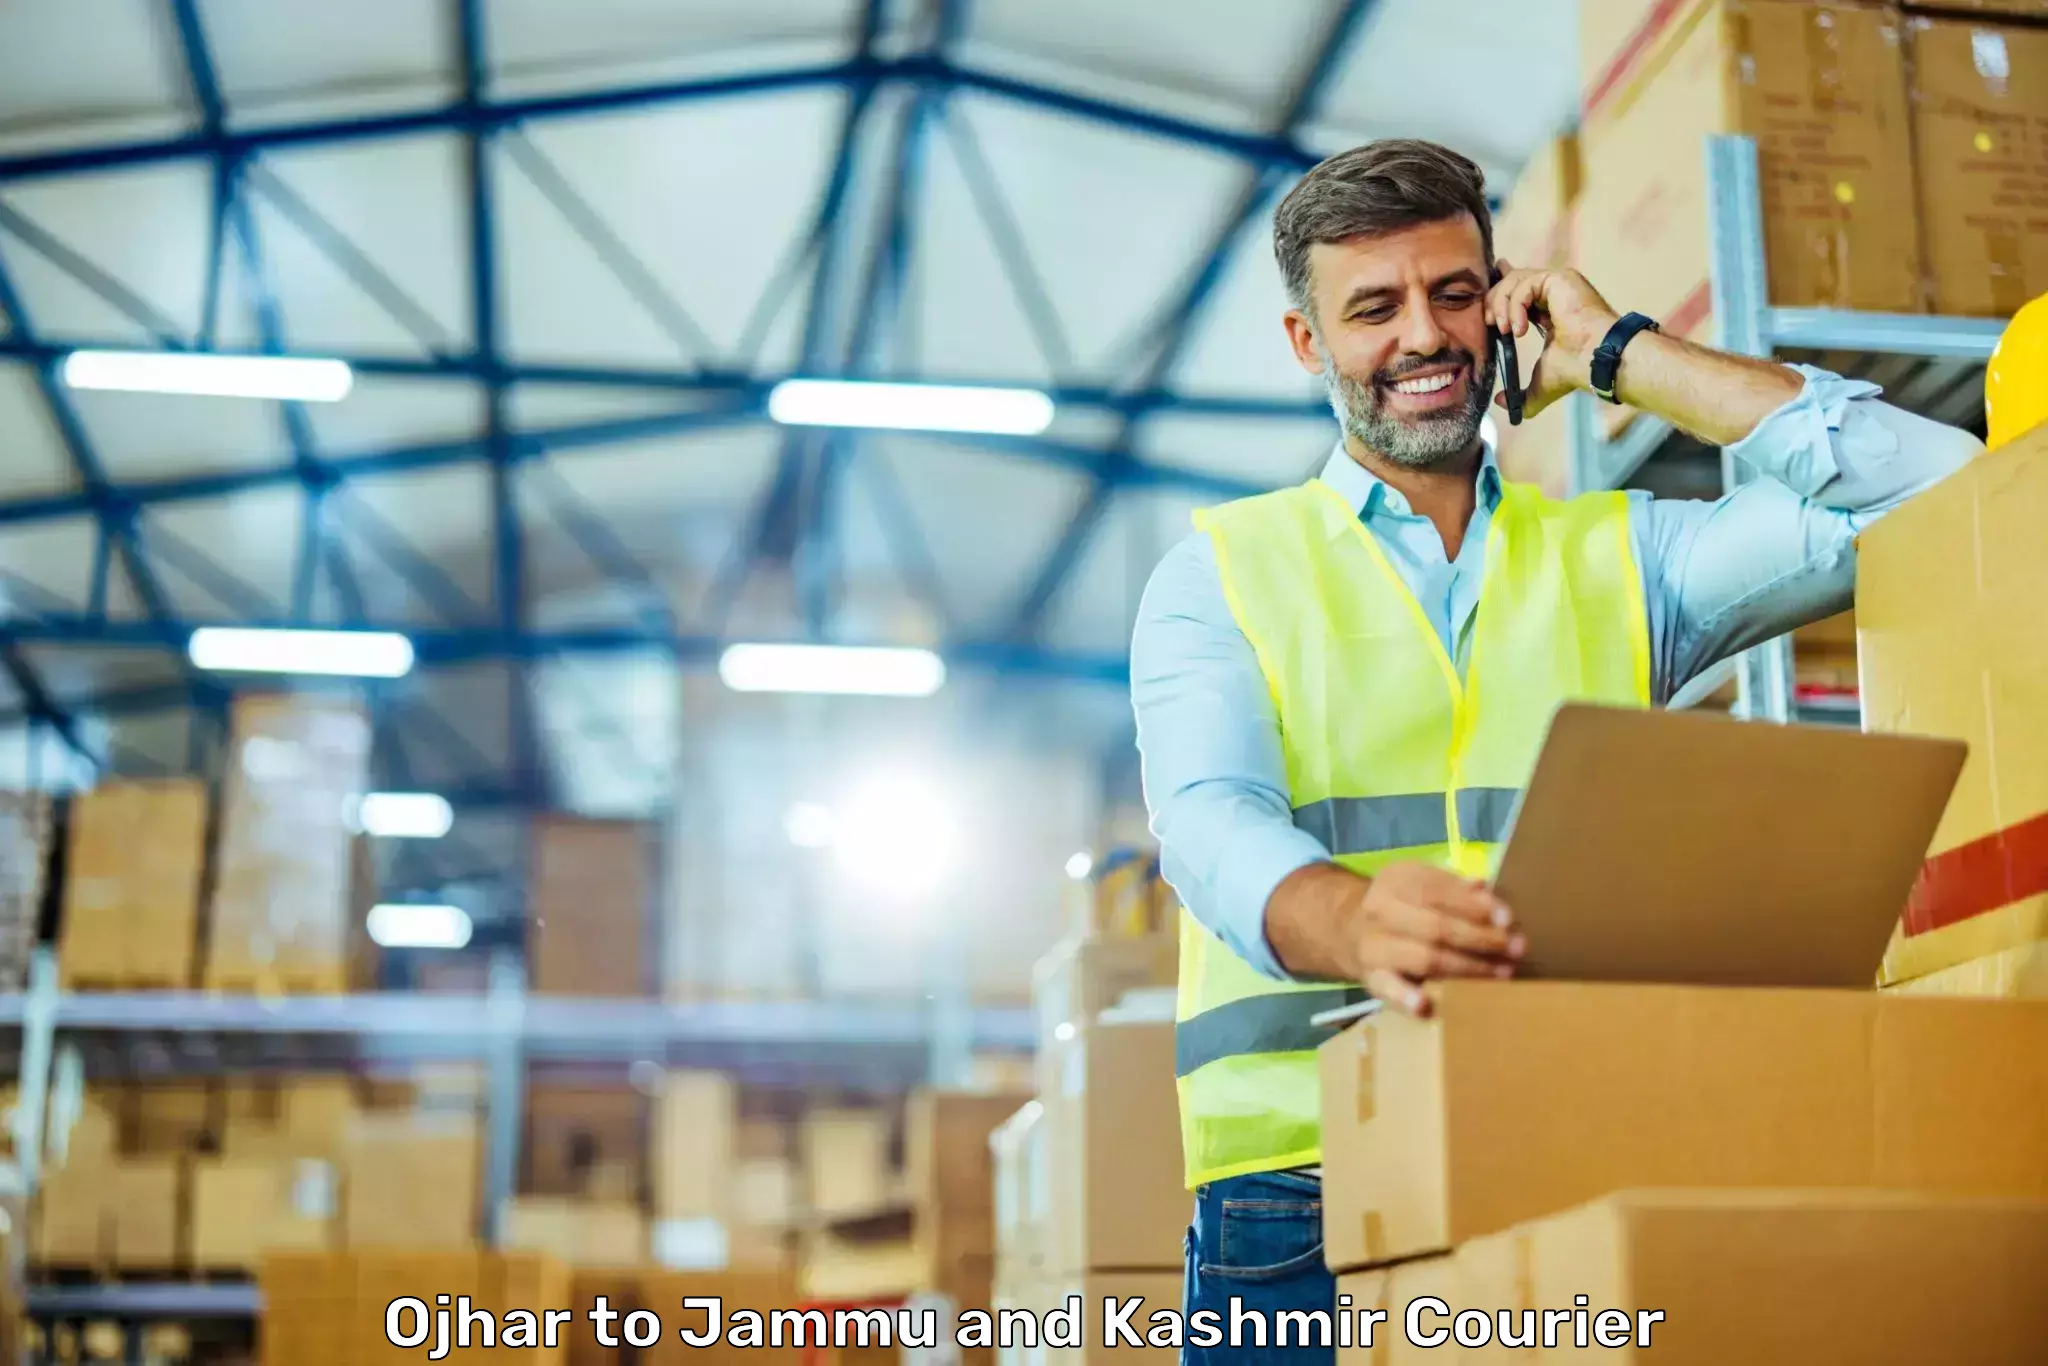 Efficient shipping operations Ojhar to Jammu and Kashmir